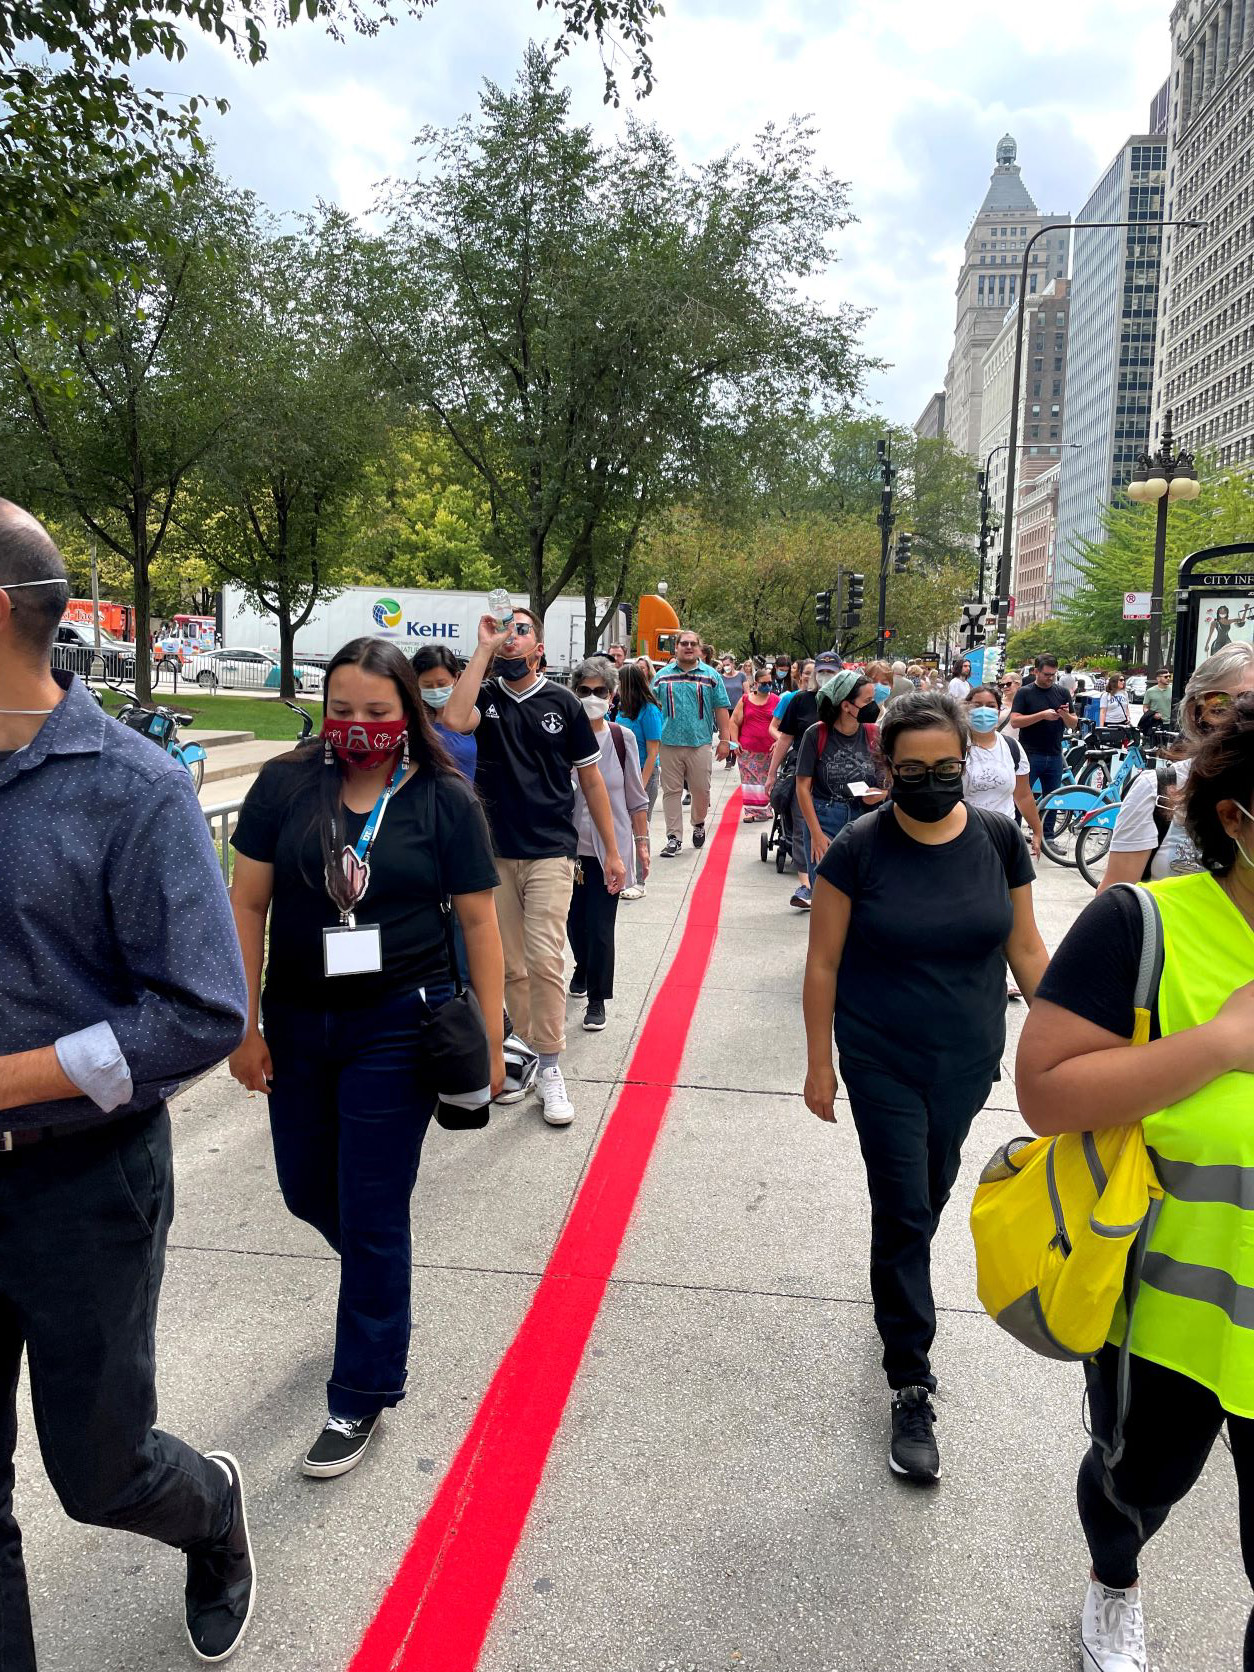 Participants of the public art performance “Whose Lakefront” walk along a line of red sand that was poured in downtown Chicago to bring attention to the land taken from the Pokagon Band of Potawatomi Indians